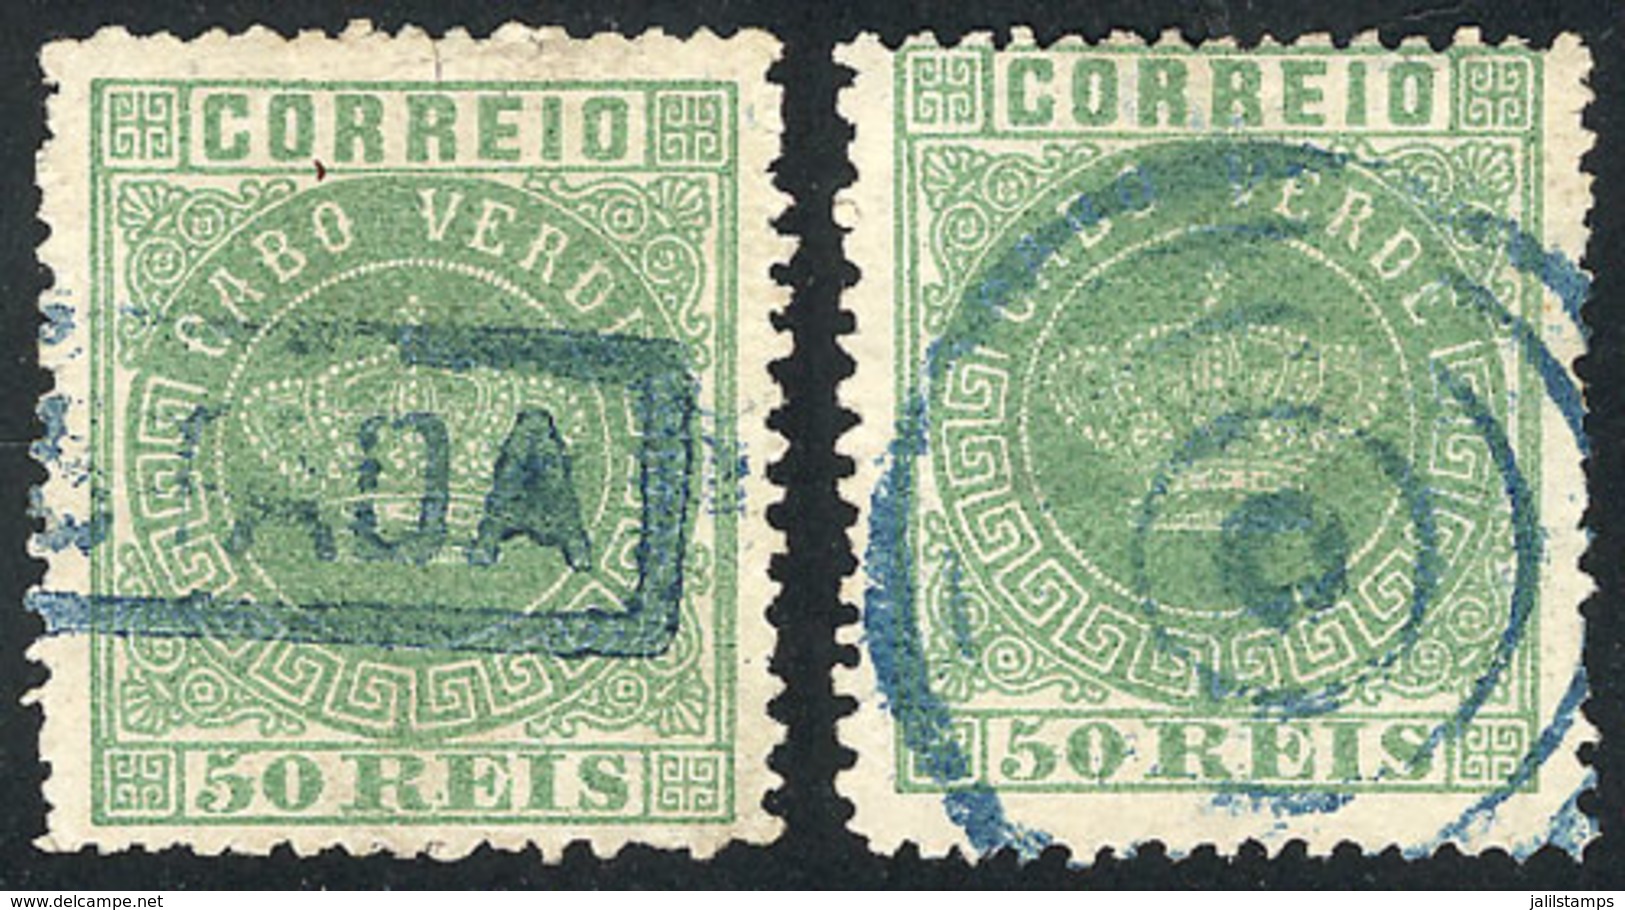 971 CAPE VERDE: Sc.6, 1877 50r. Green, Perf 12½, 2 Used Examples With Different Cancels, Catalogue Value US$145, VF Qual - Cape Verde